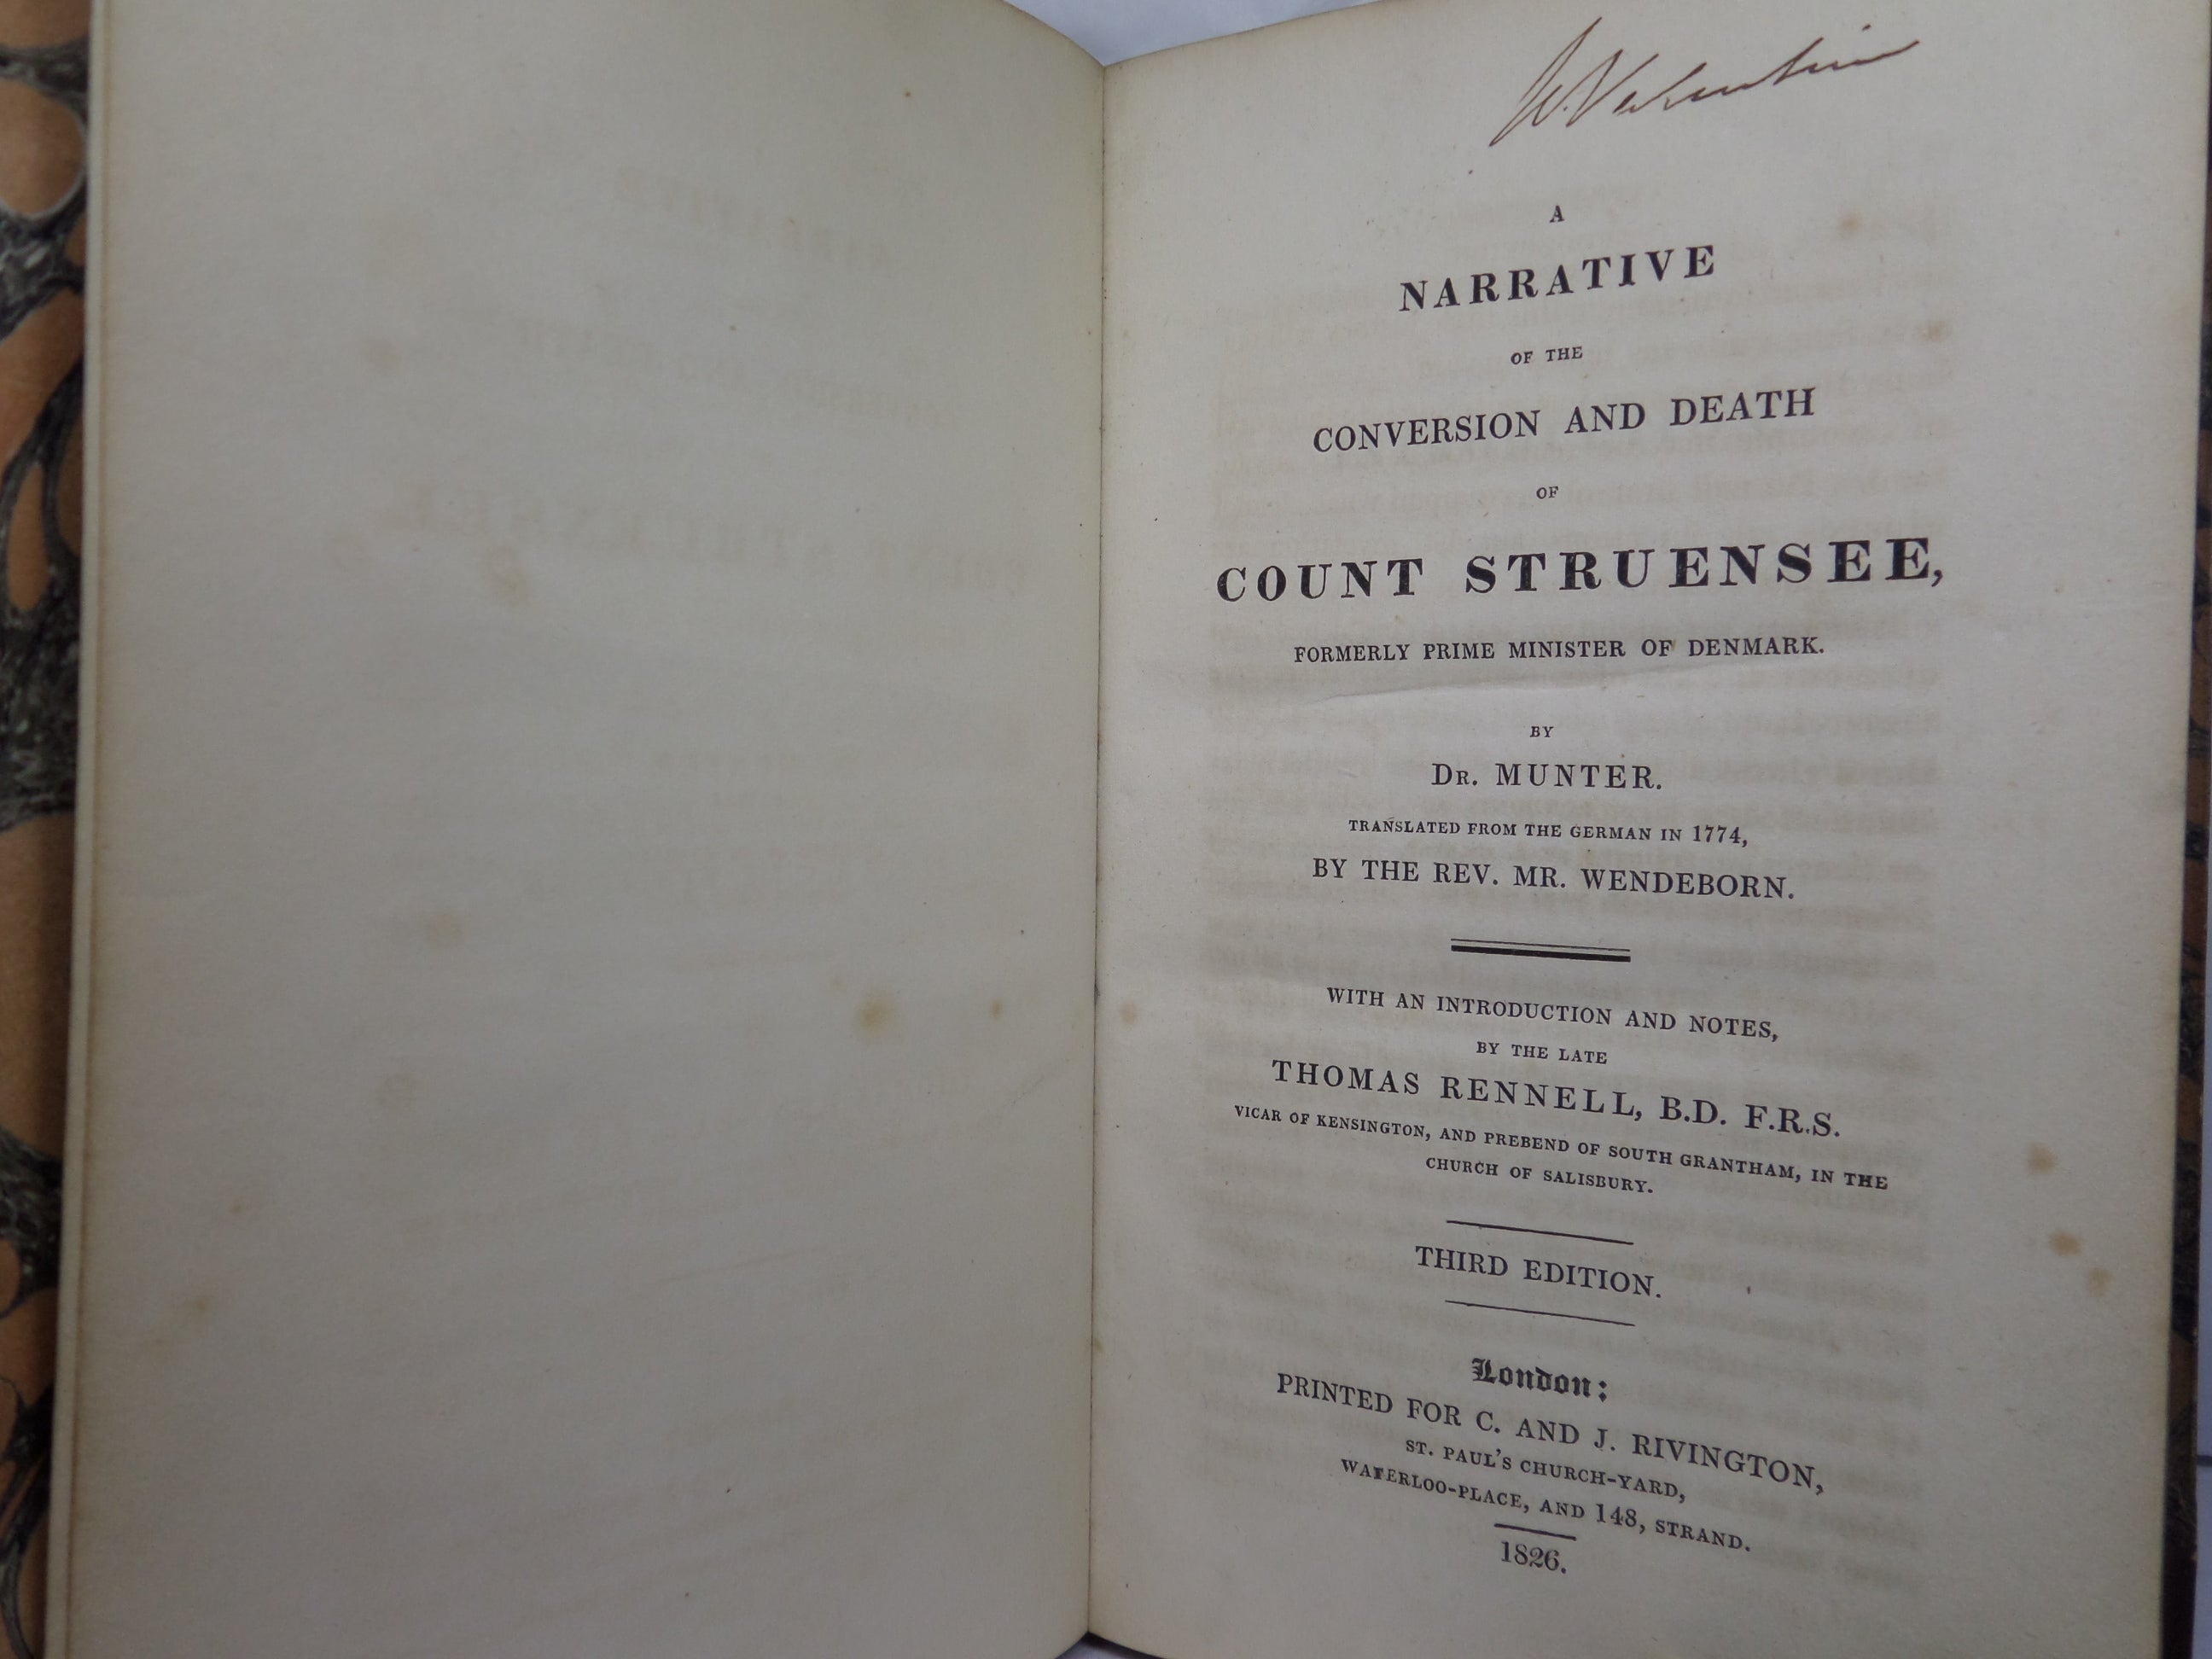 A NARRATIVE OF THE CONVERSION AND DEATH OF COUNT STRUENSEE 1826 THIRD EDITION